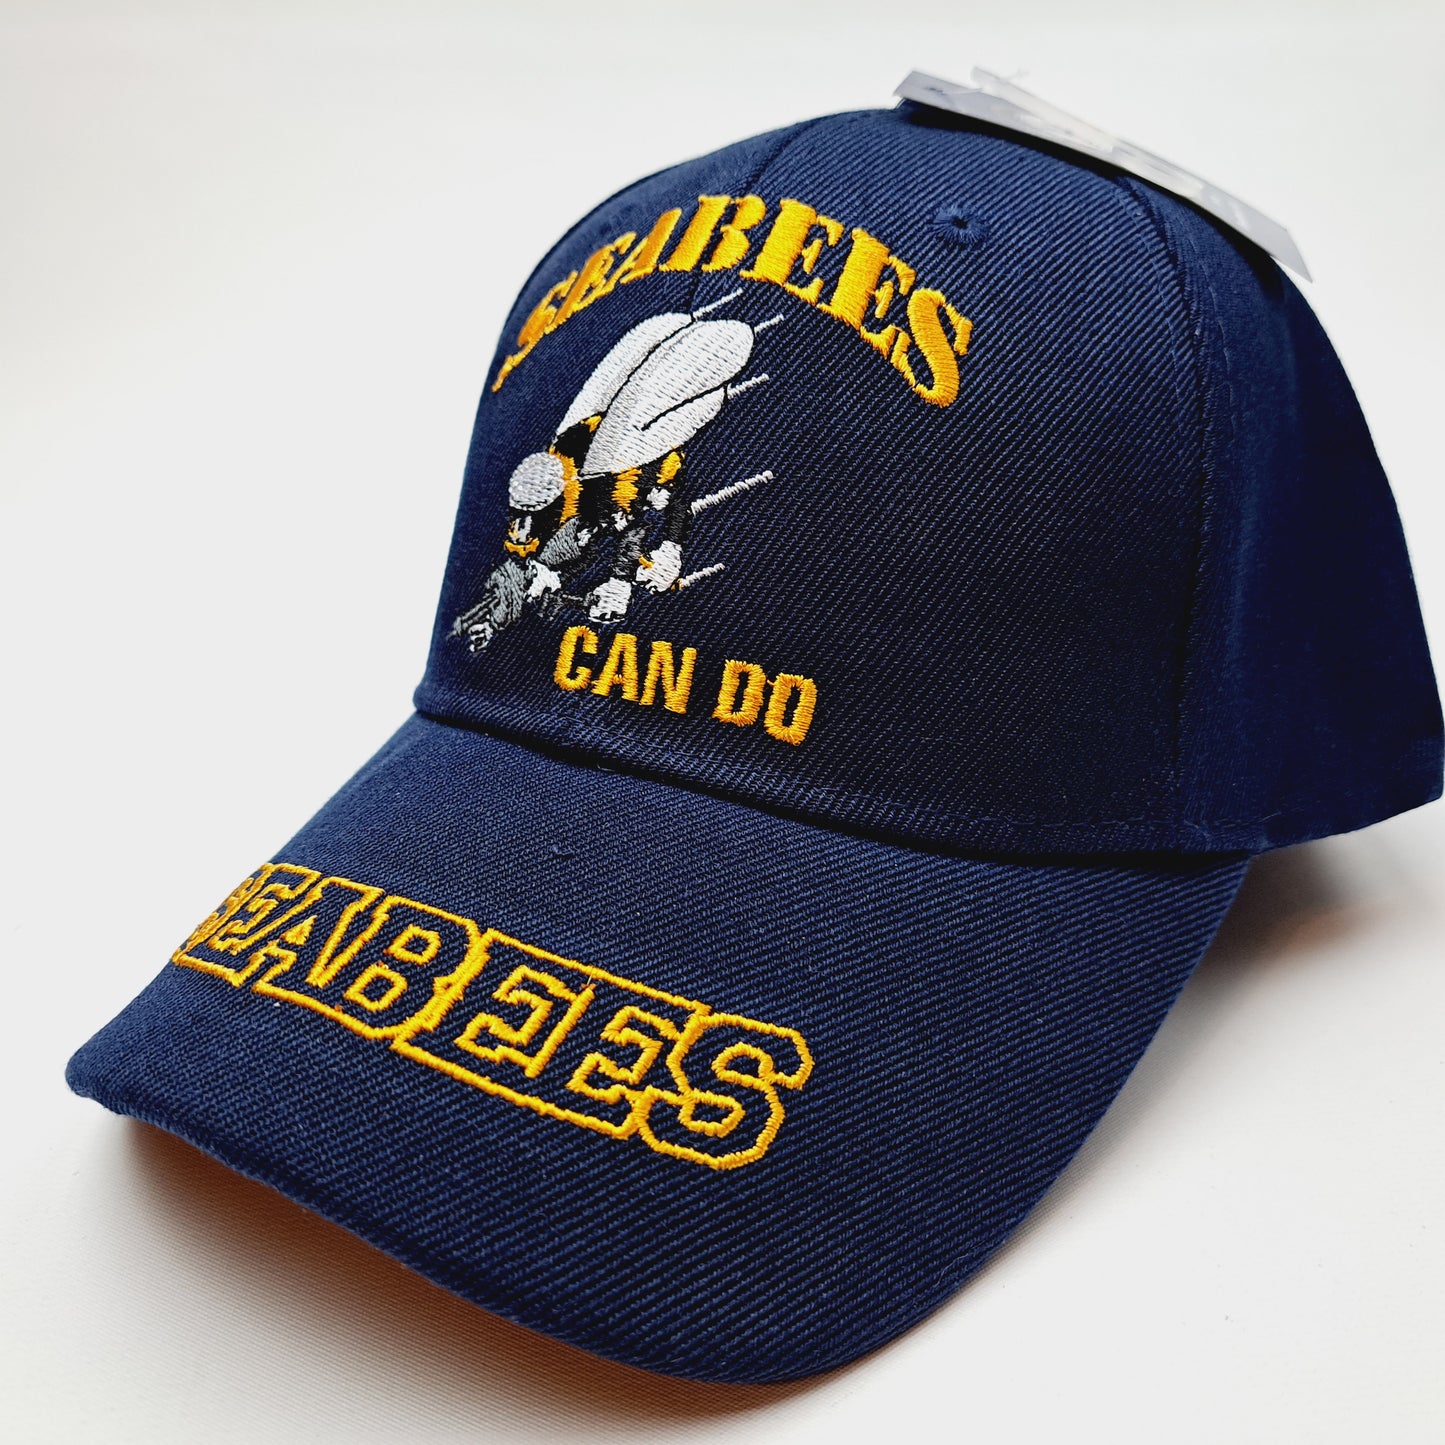 US Navy Seabees Can Do Men's Official Ball Cap Hat Embroidered Navy Blue Acrylic